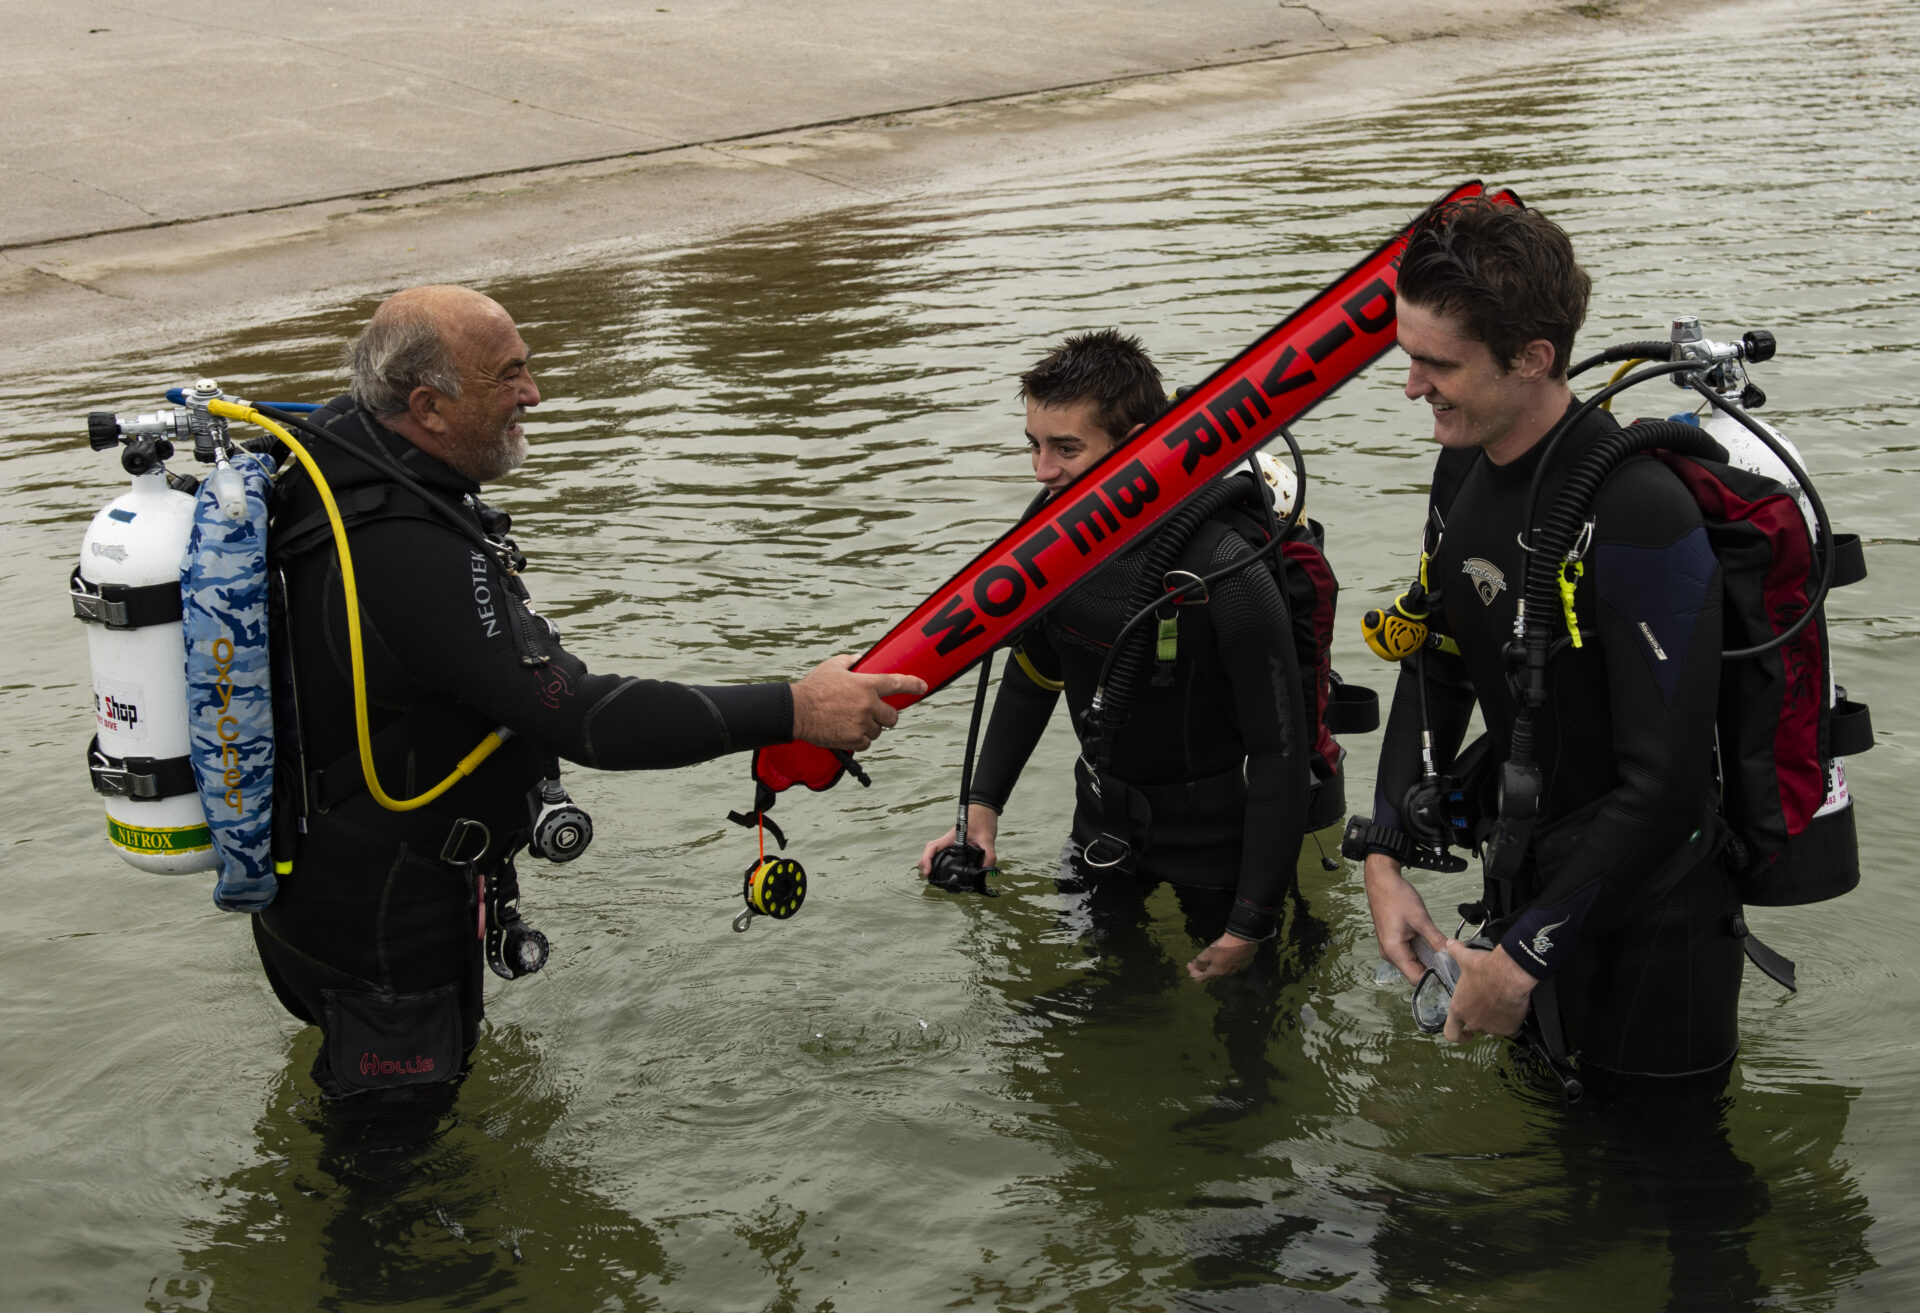 Students learning how to scuba dive